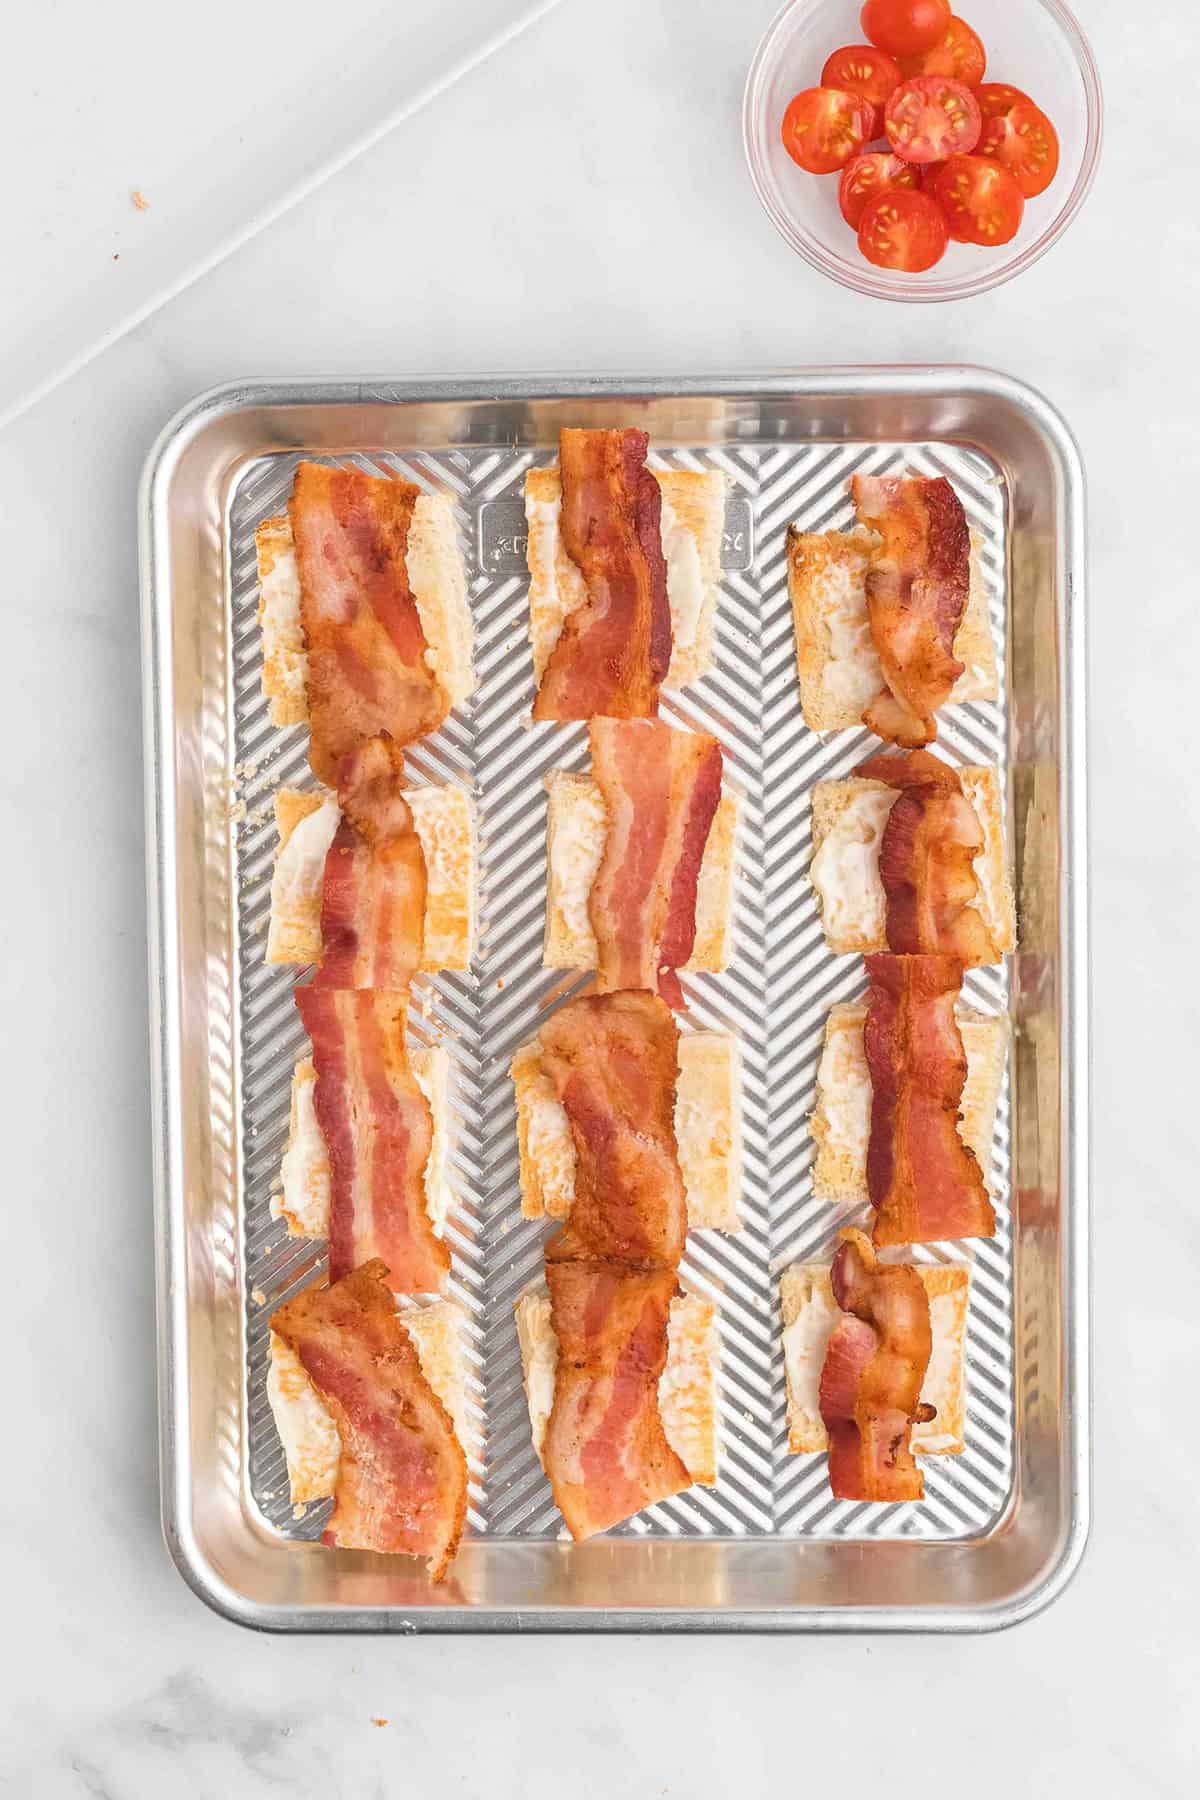 Bacon pieces added on top of mayonnaise.